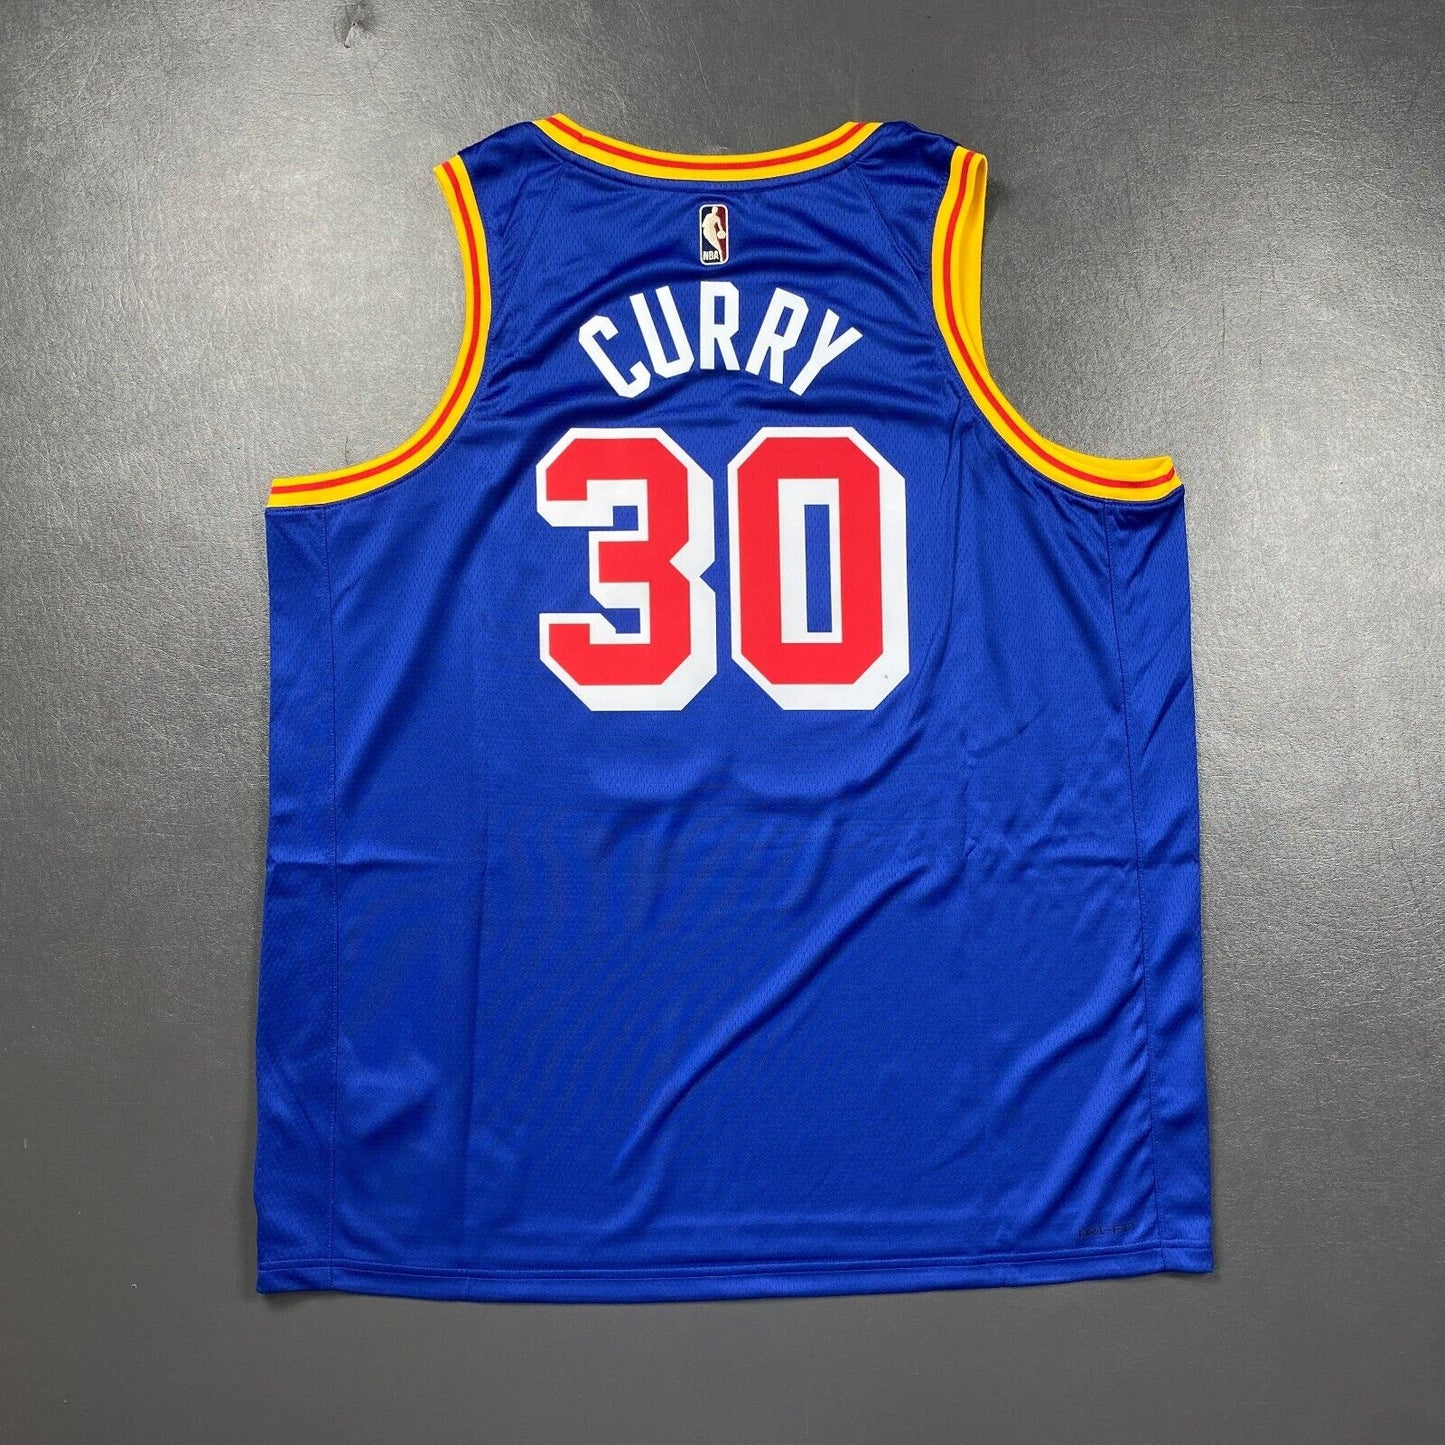 100% Authentic Stephen Curry Warriors Classic Swingman Jersey Size 56 2XL Mens